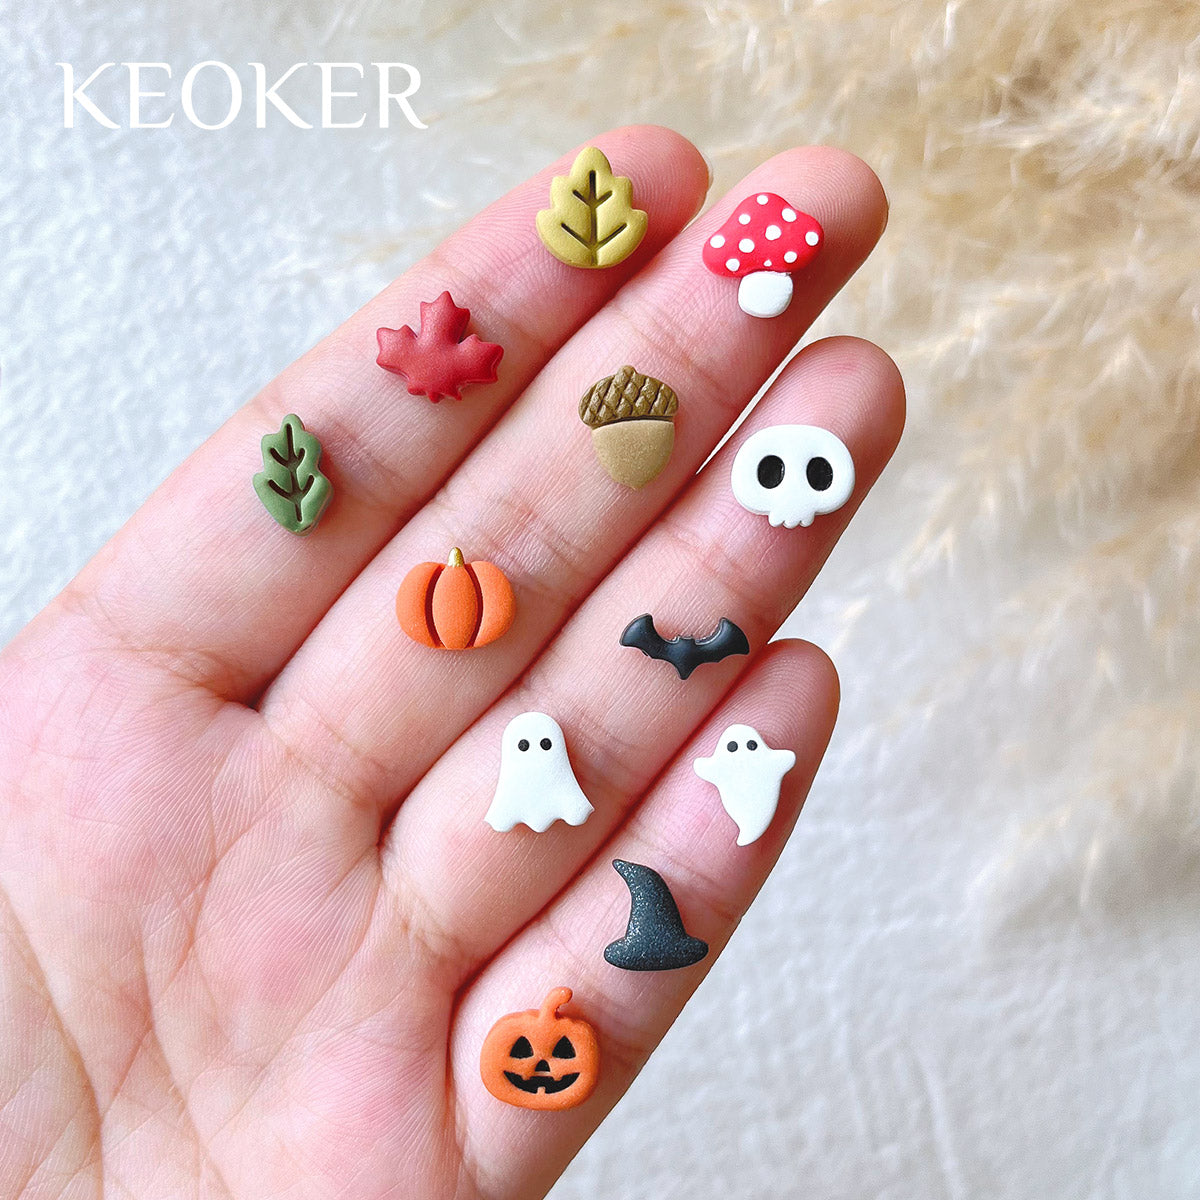 KEOKER Halloween Texture Sheets for Polymer Clay